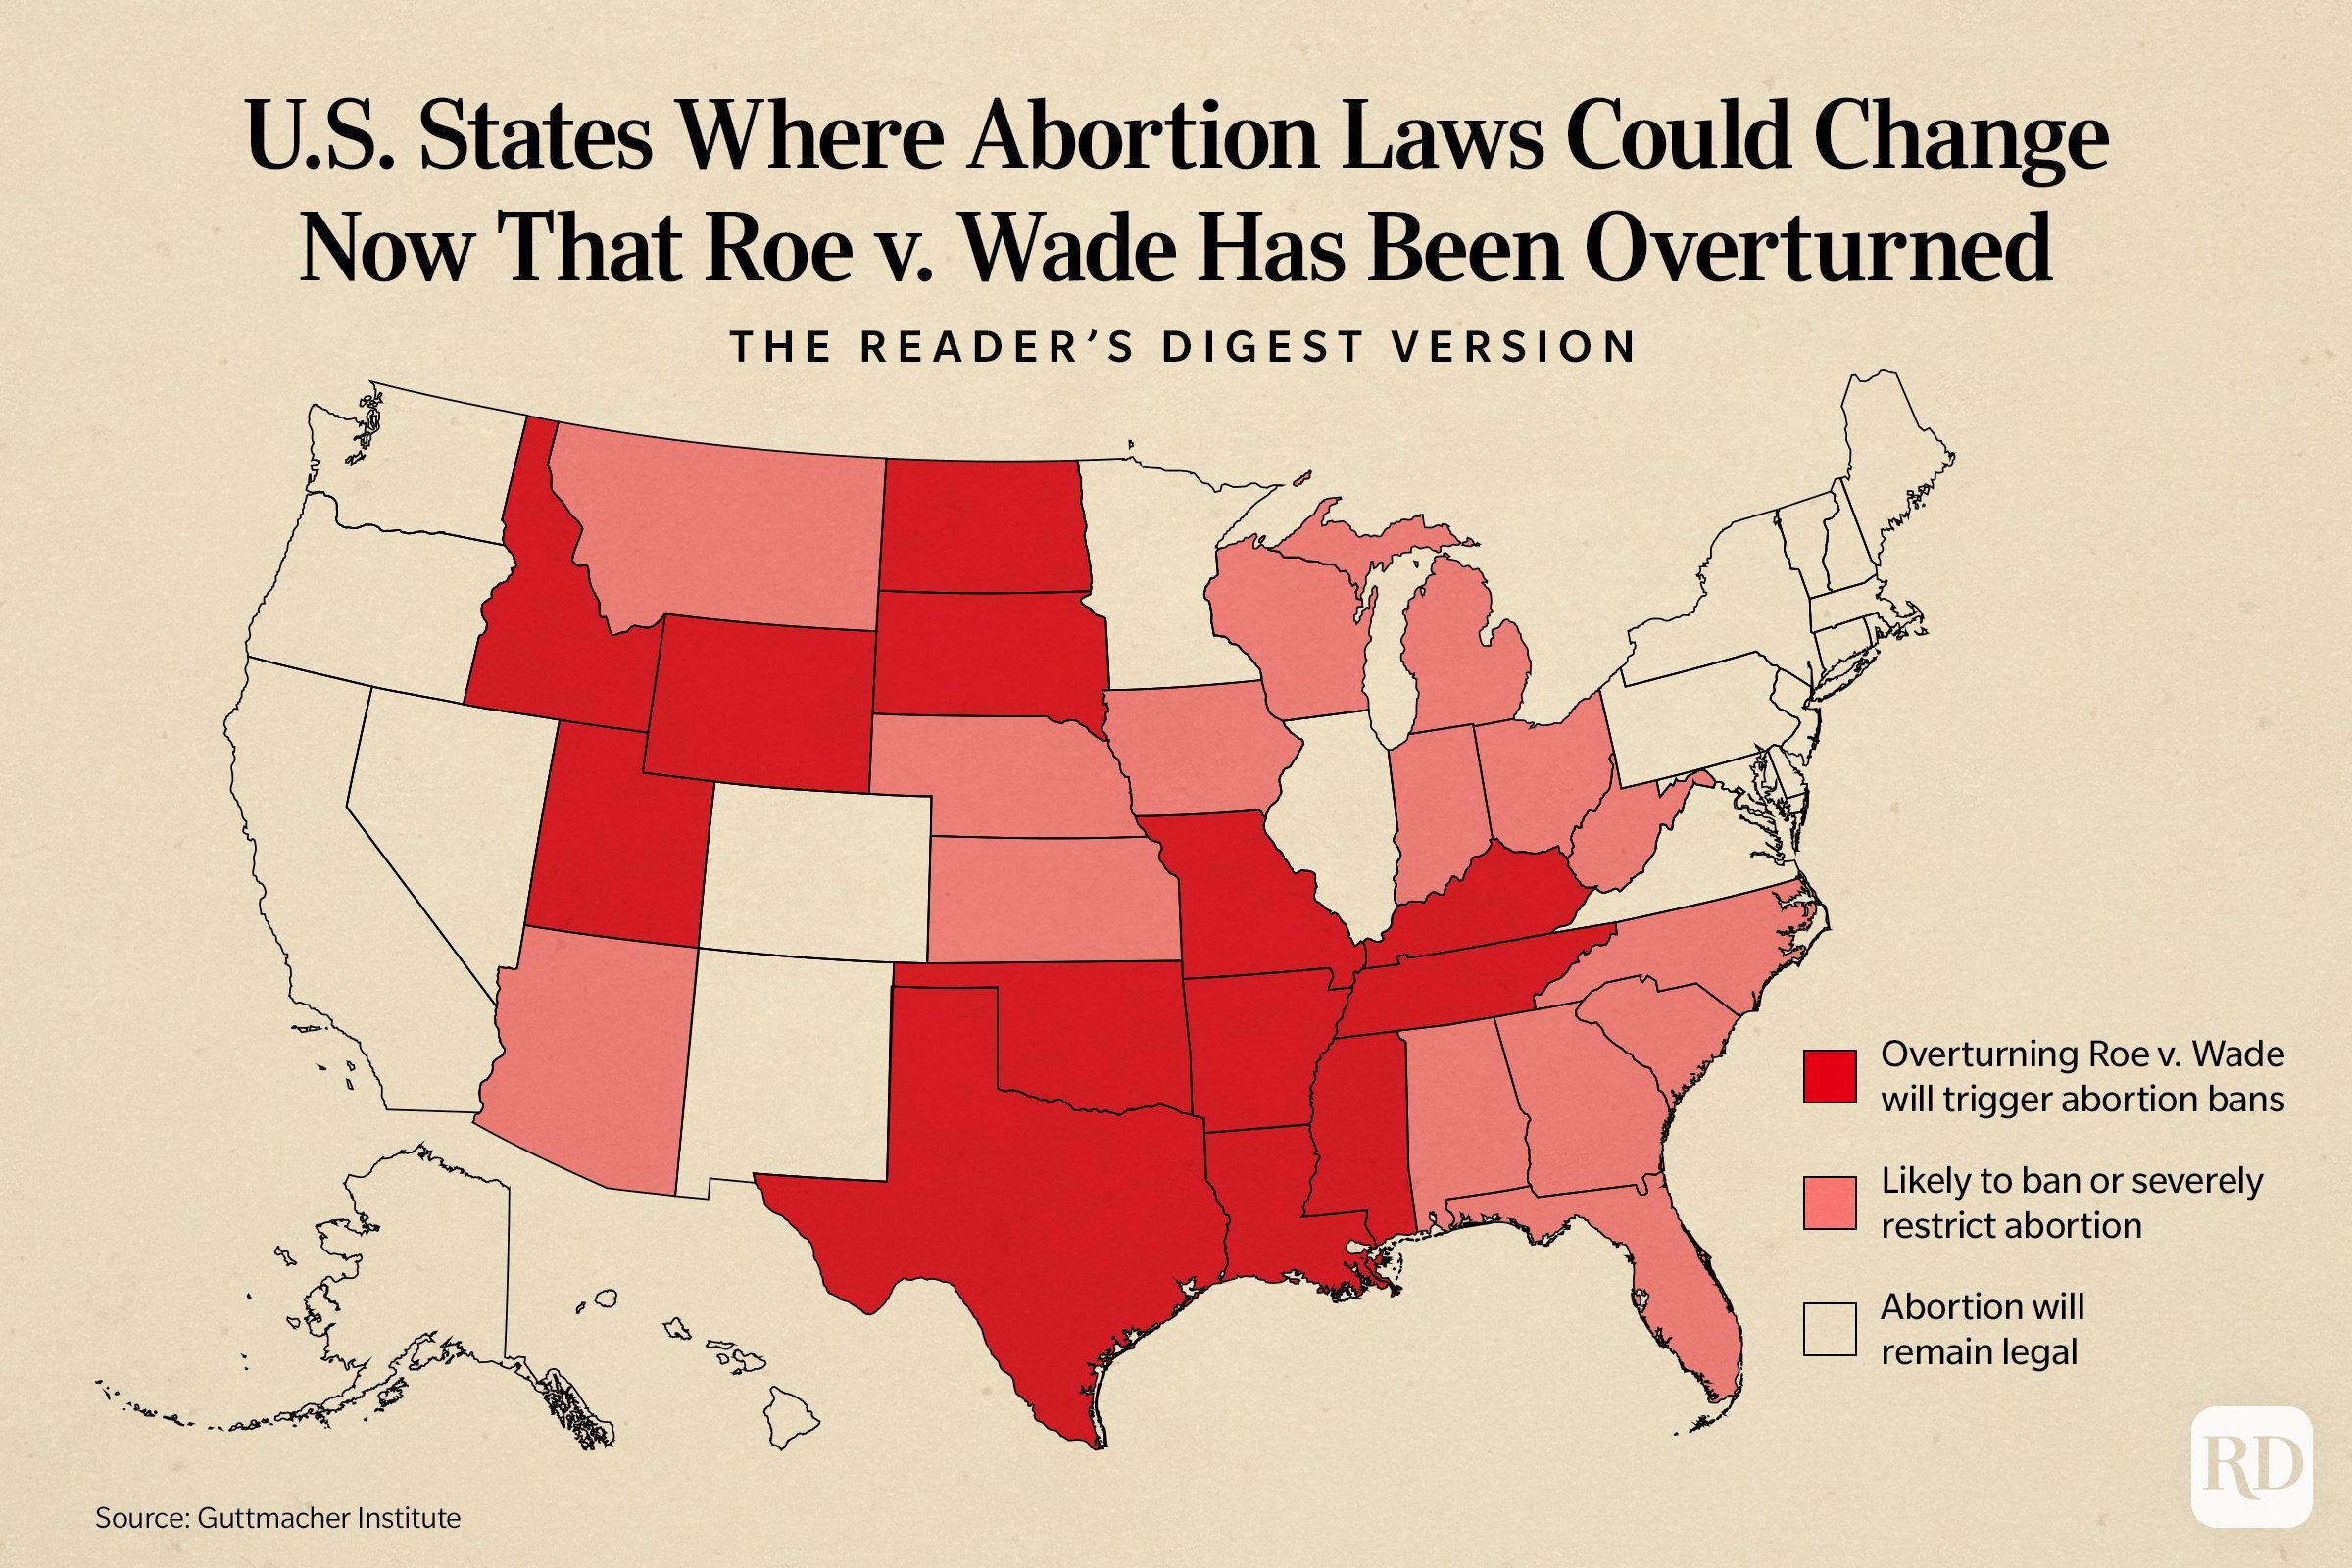 Infographic of U.S. States where abortion laws could change now that Roe v. Wade has been overturned